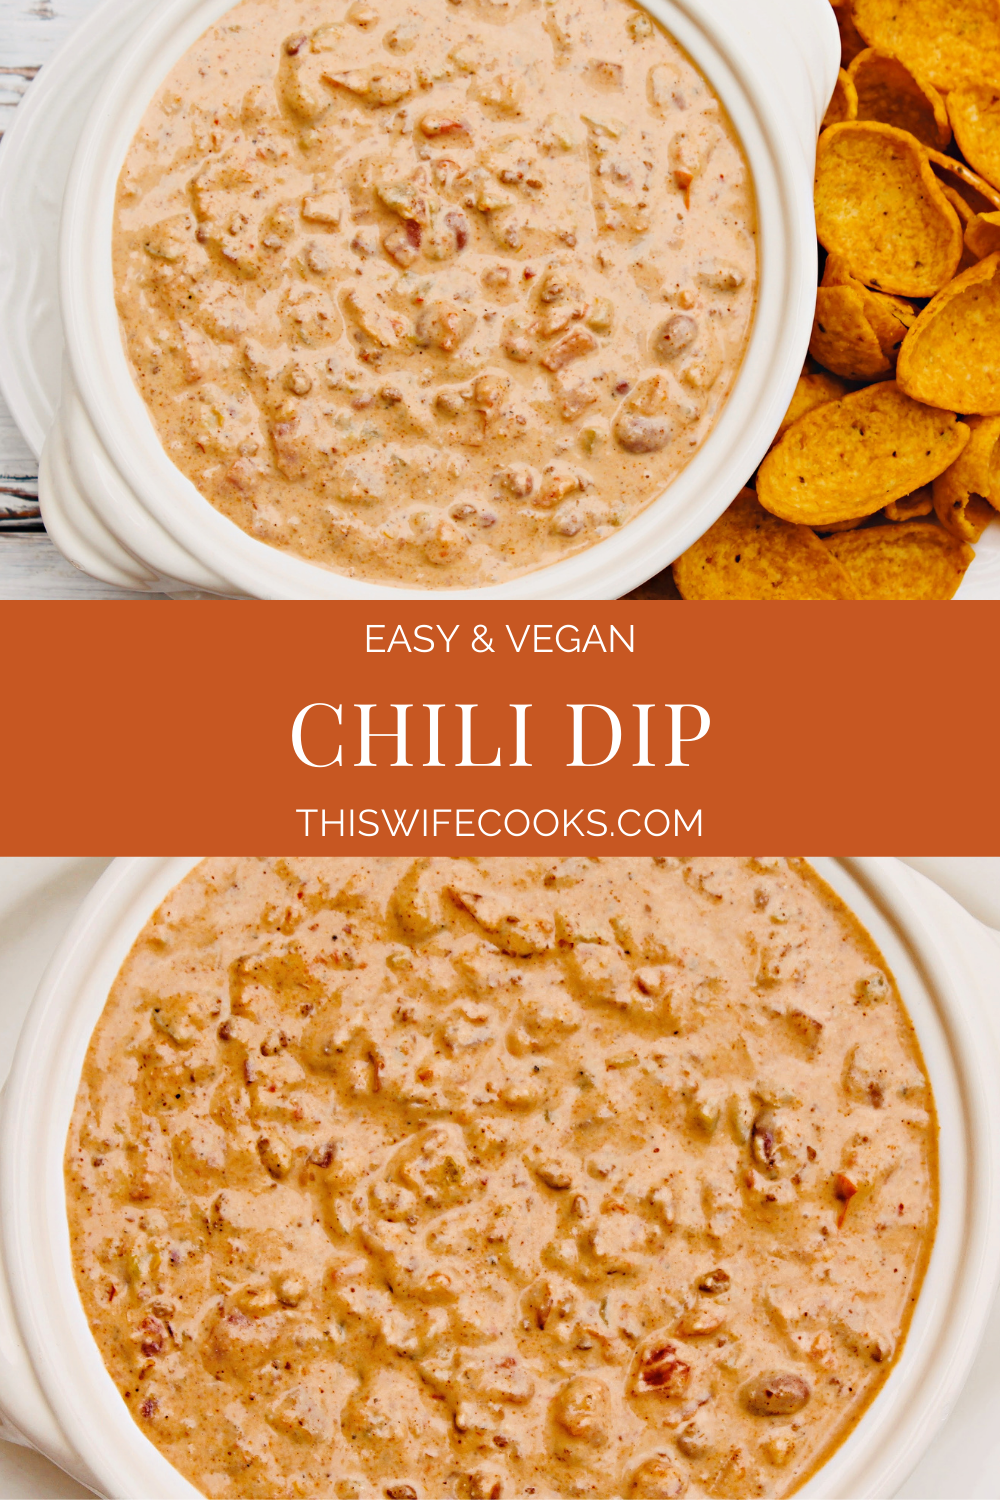 Chili Dip ~ Need a quick and easy game day or movie night snack? This crowd-pleasing dip is ready to serve in 10 minutes or less! via @thiswifecooks